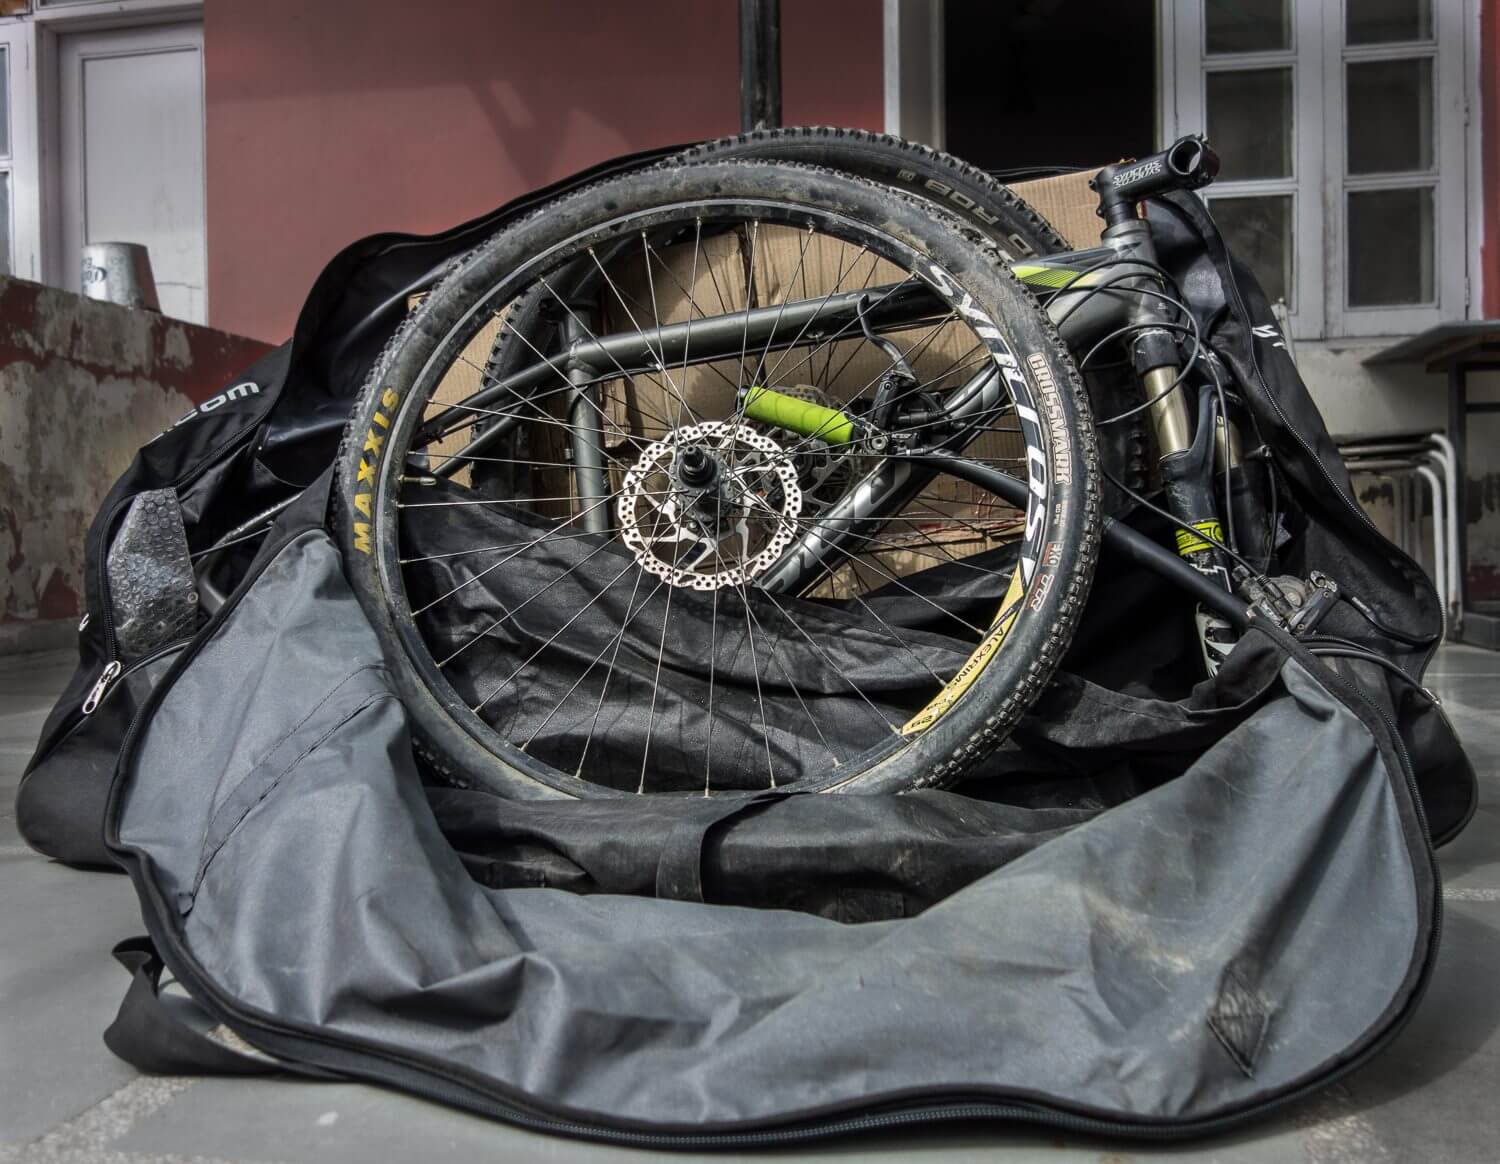 Btwin Bike transport bag with cycle inside